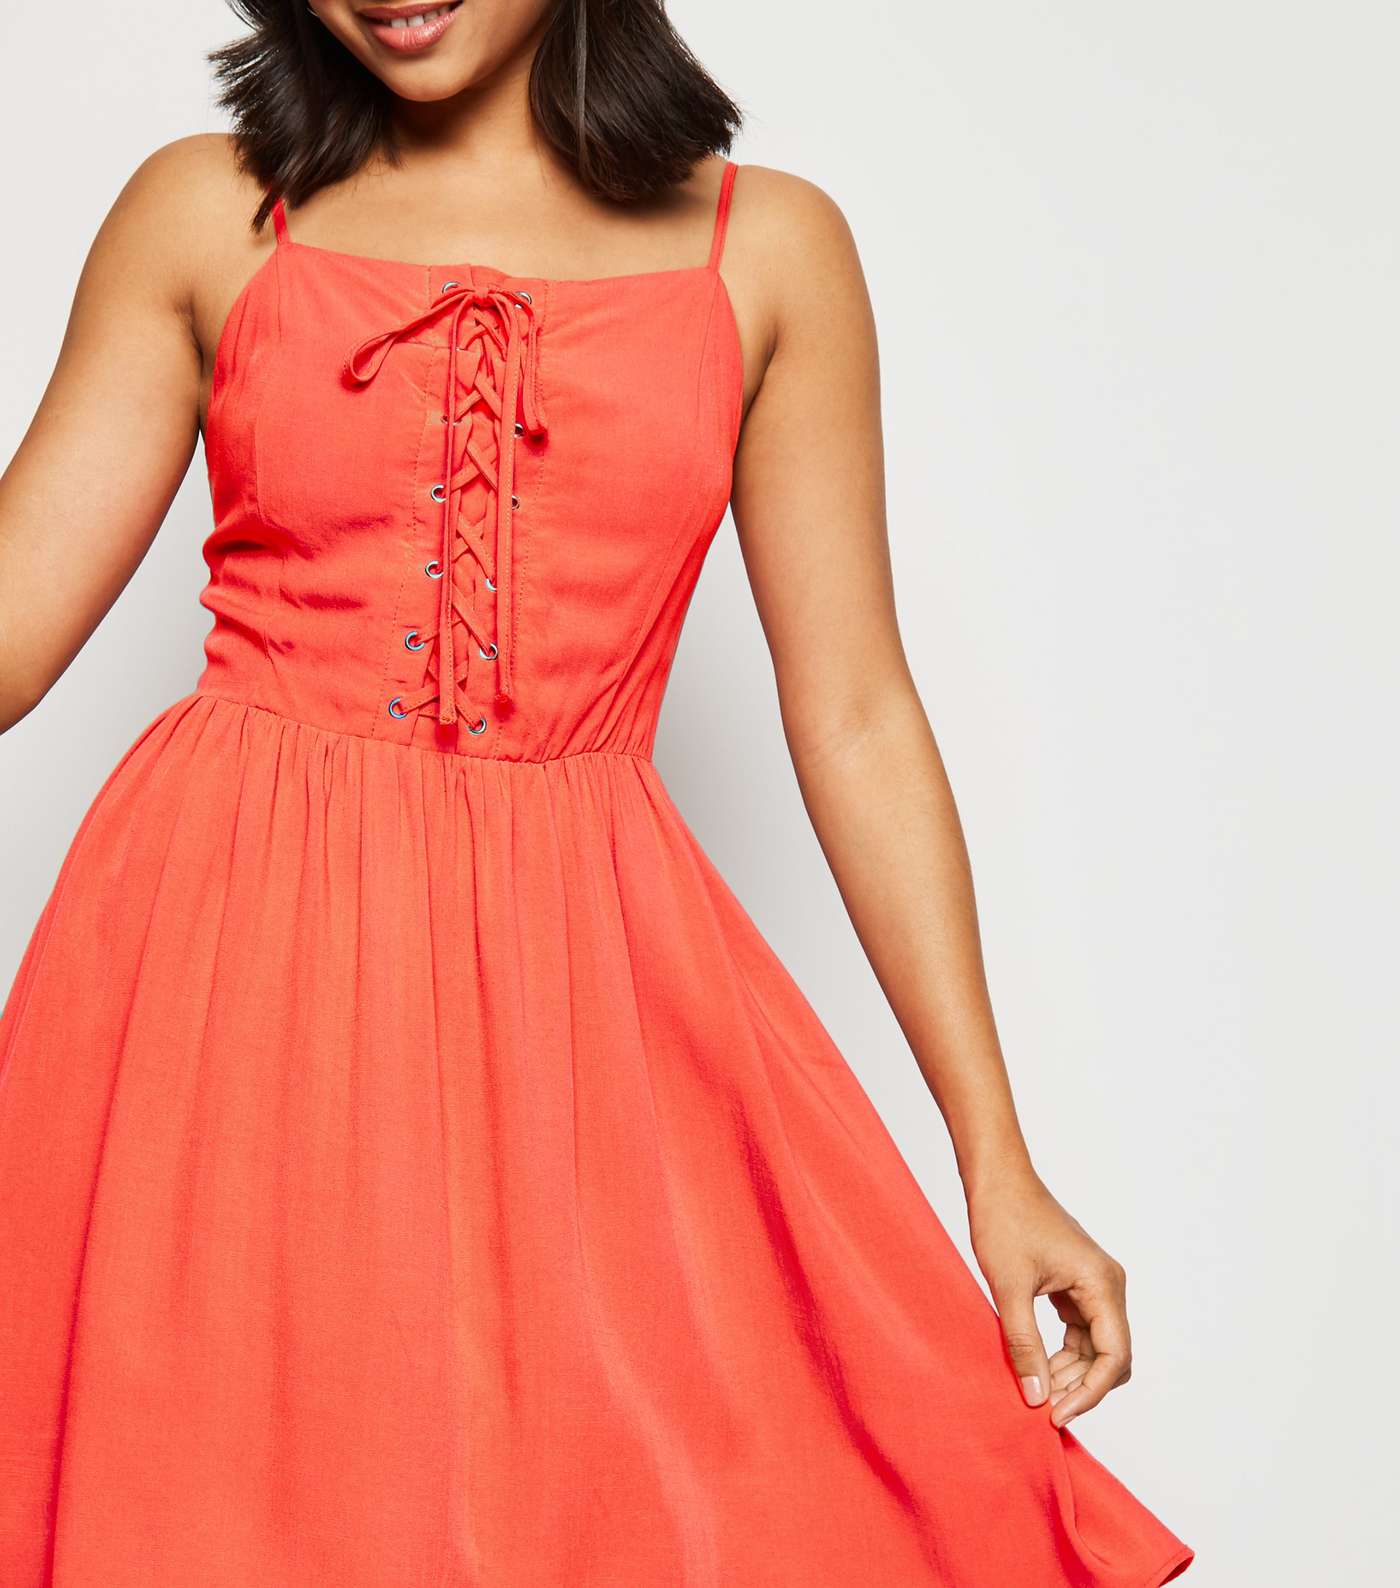 Petite Red Lace Up Skater Dress Image 5